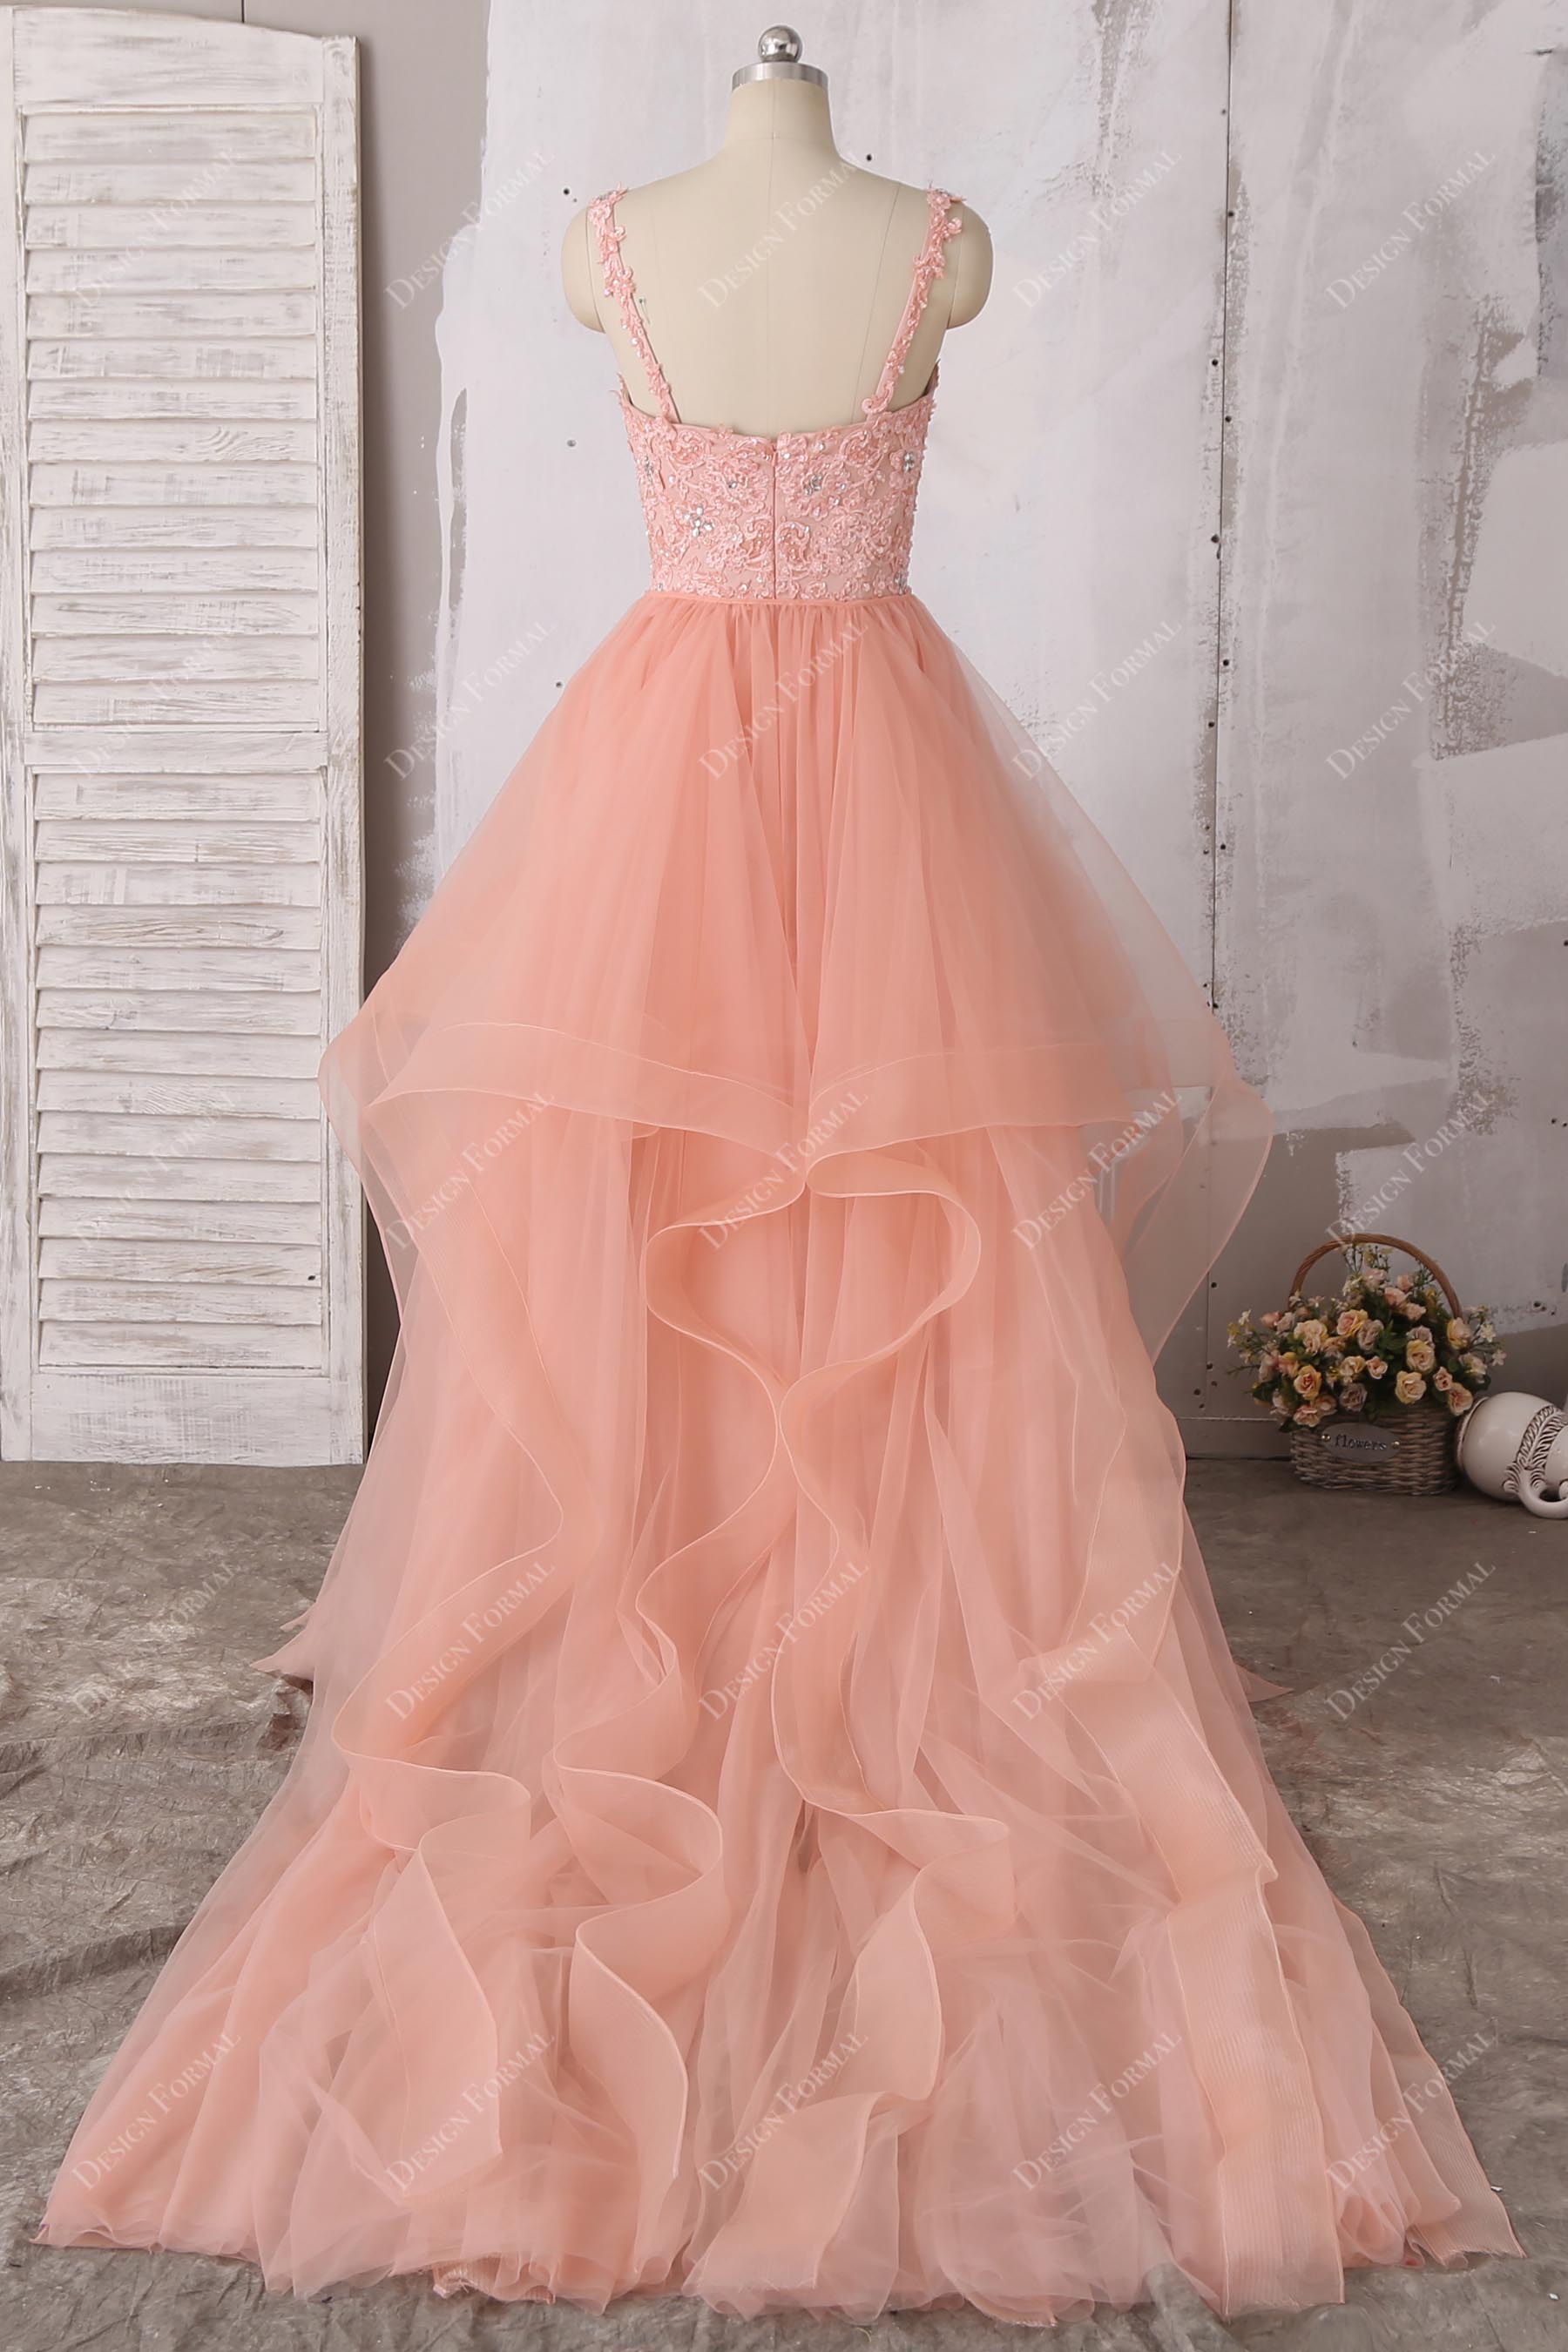 ruffled tulle ball gown prom dress